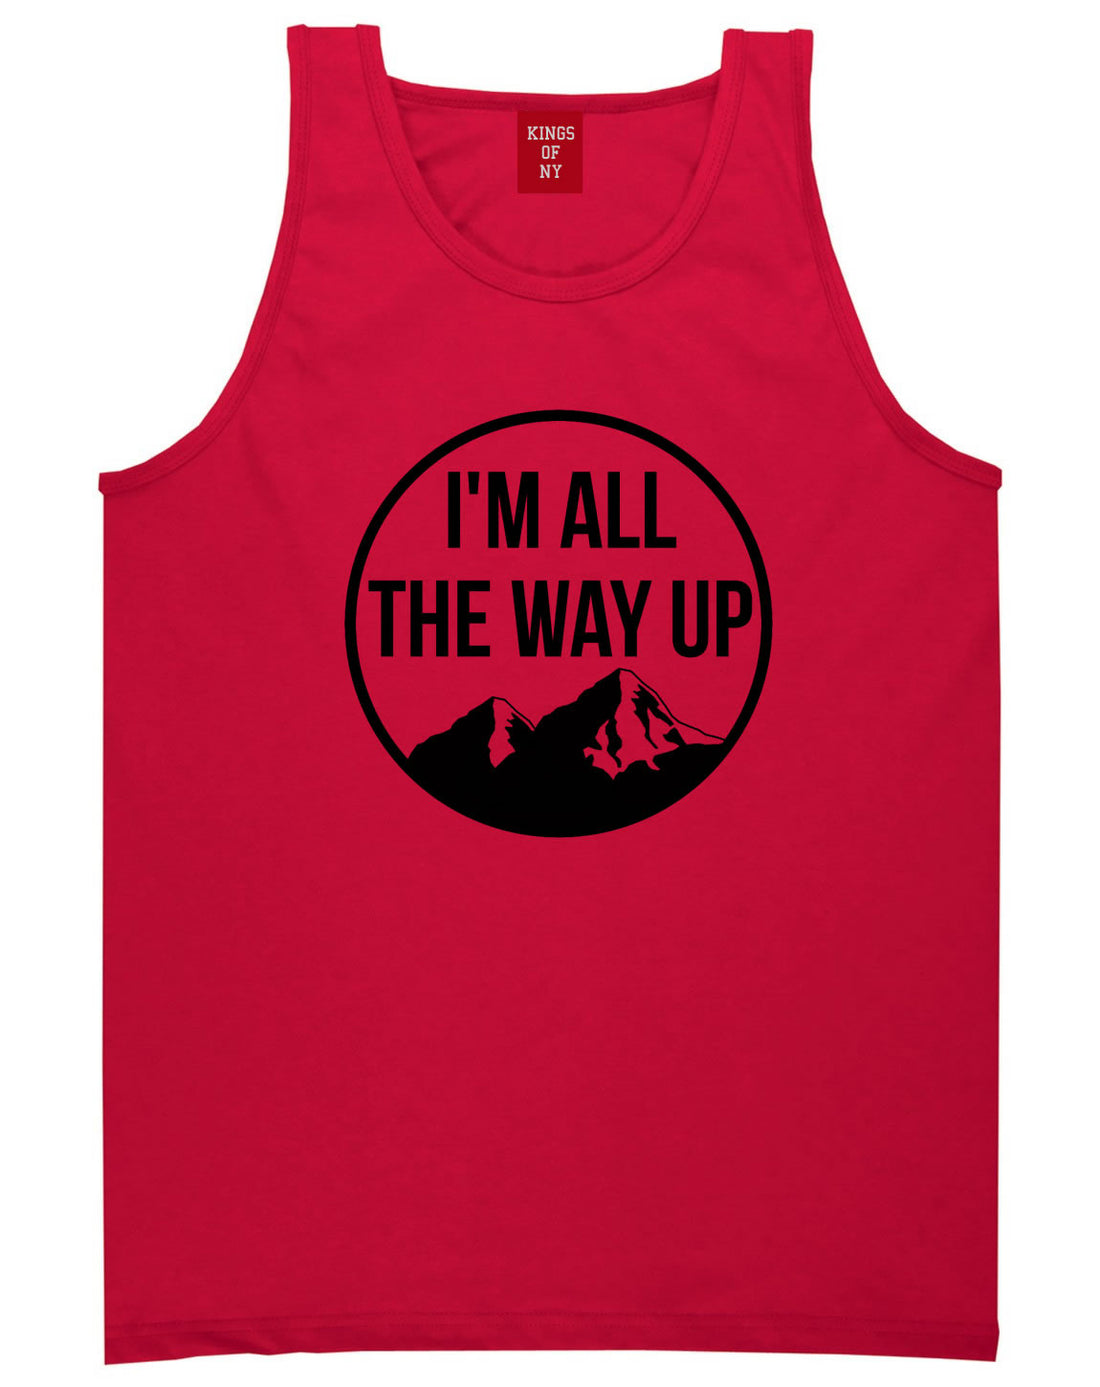 I'm All The Way Up Tank Top By Kings Of NY